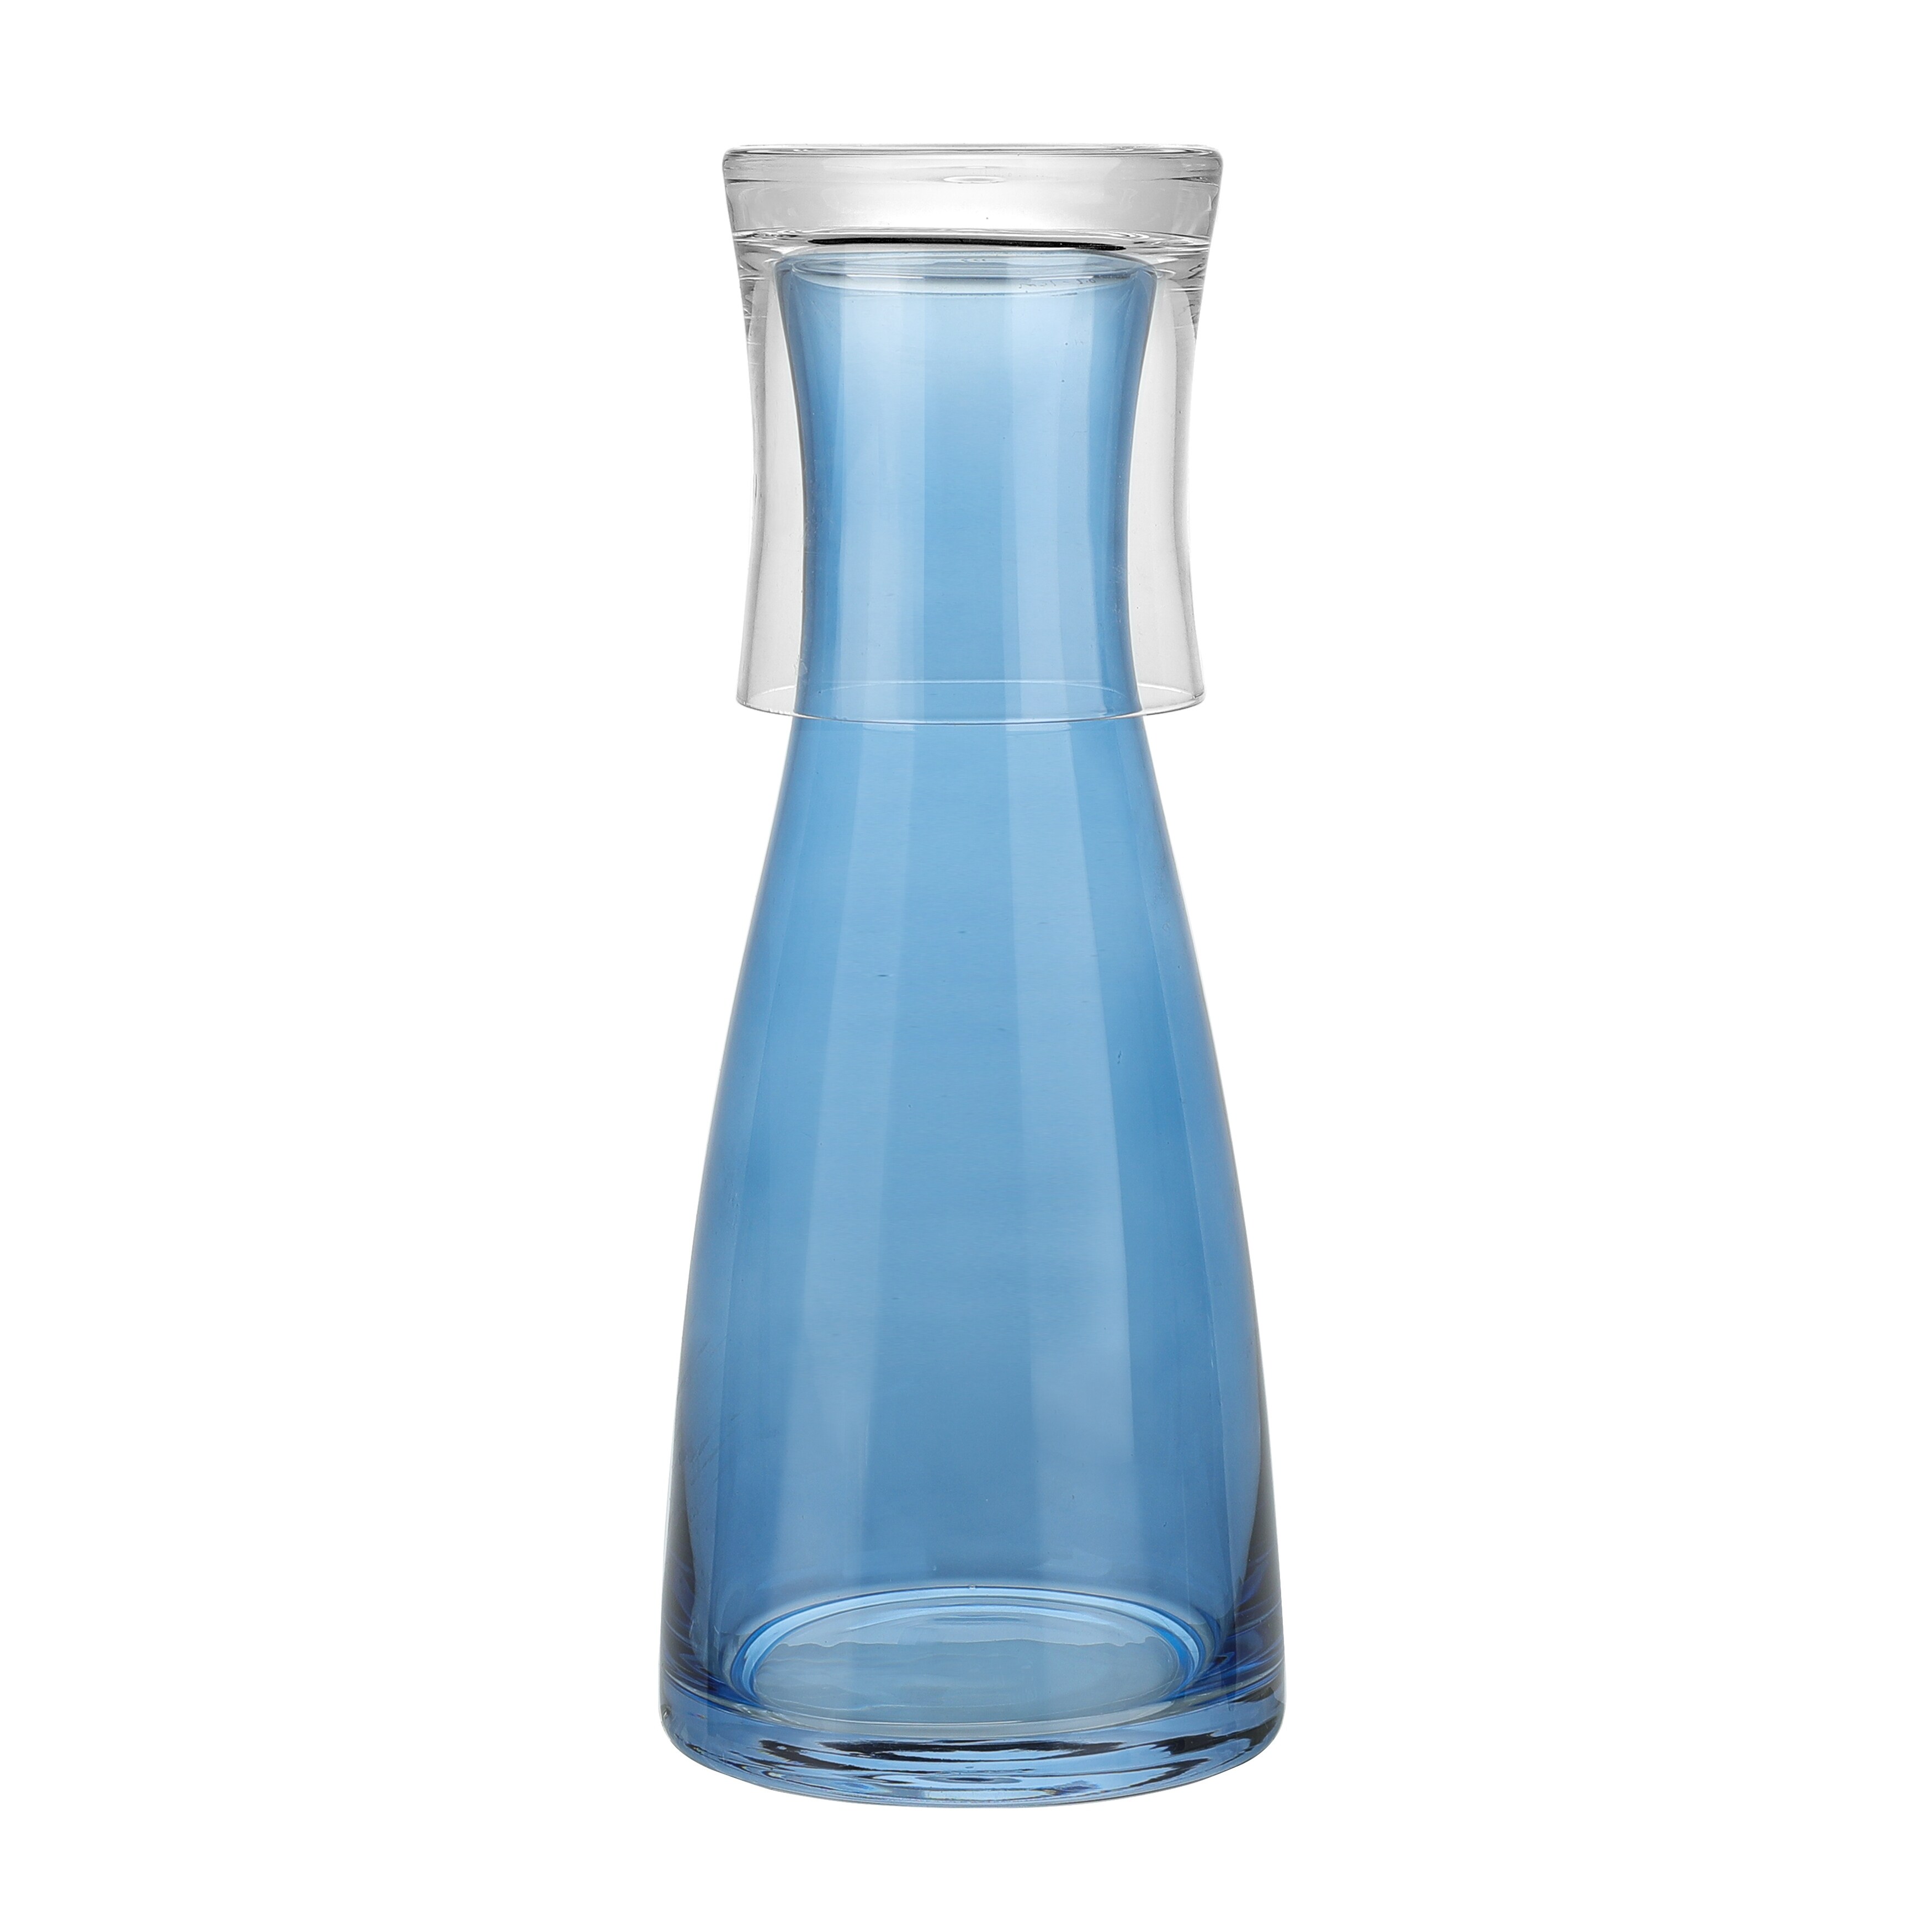 https://ak1.ostkcdn.com/images/products/is/images/direct/913f01420e63df088596f6eb86487635f26c85bc/American-Atelier-Bedside-Blue-Water-Carafe-with-Clear-Tumbler.jpg